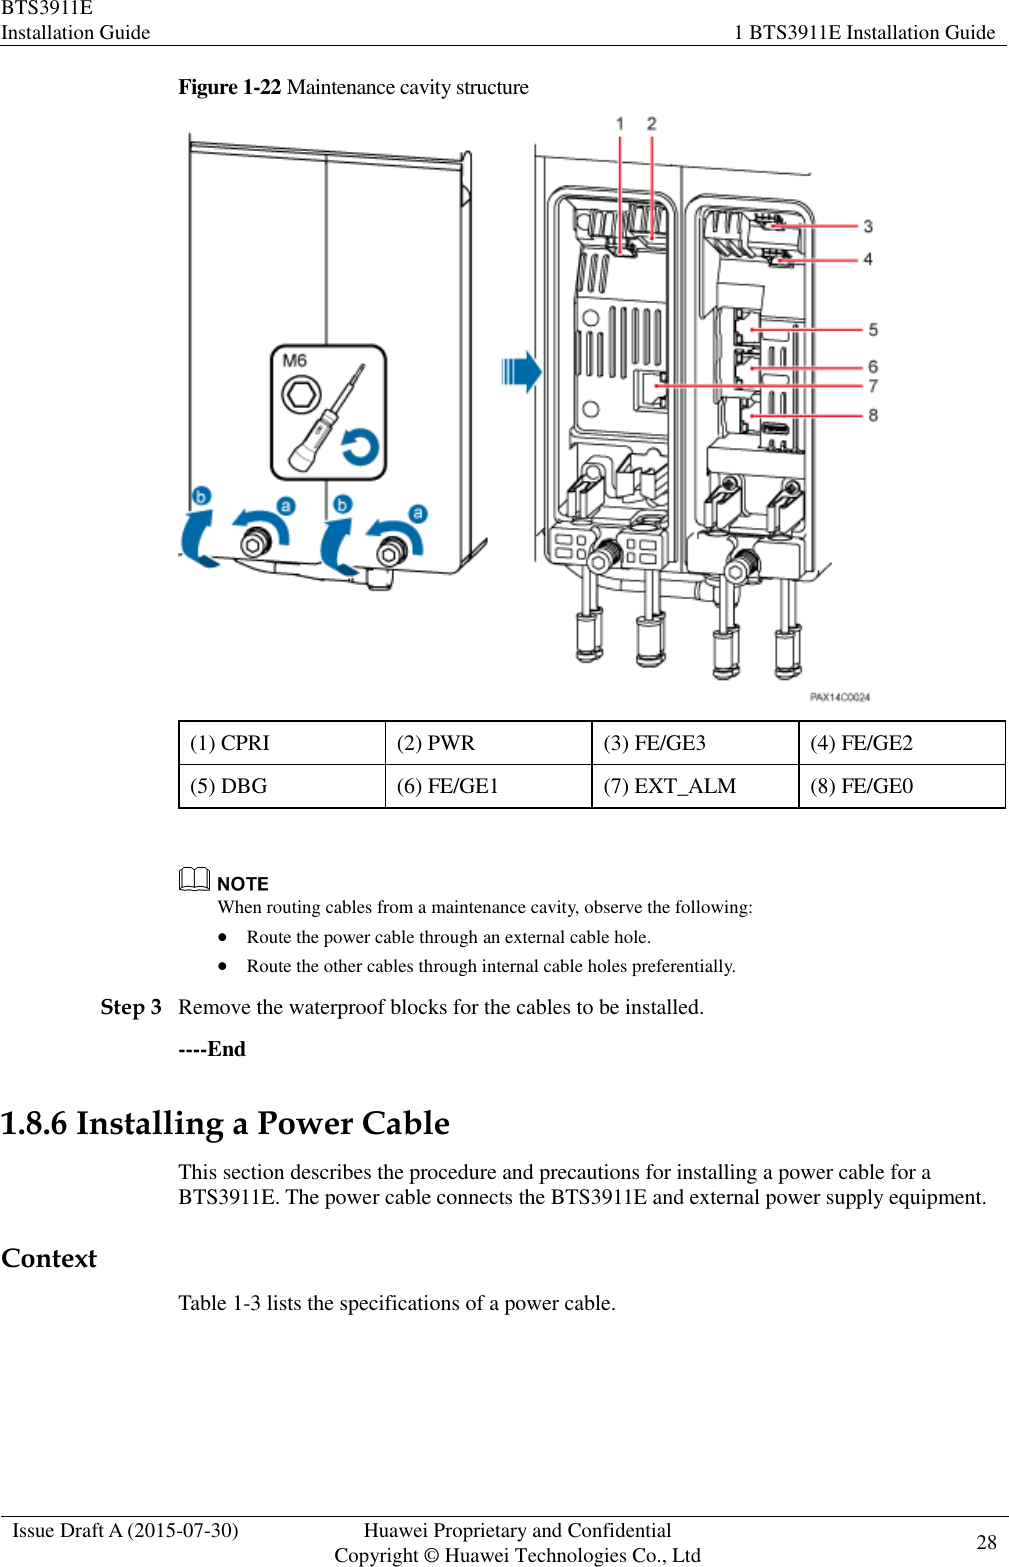 BTS3911E Installation Guide 1 BTS3911E Installation Guide  Issue Draft A (2015-07-30) Huawei Proprietary and Confidential           Copyright © Huawei Technologies Co., Ltd 28    Figure 1-22 Maintenance cavity structure  (1) CPRI (2) PWR (3) FE/GE3 (4) FE/GE2 (5) DBG (6) FE/GE1 (7) EXT_ALM (8) FE/GE0   When routing cables from a maintenance cavity, observe the following:  Route the power cable through an external cable hole.  Route the other cables through internal cable holes preferentially. Step 3 Remove the waterproof blocks for the cables to be installed. ----End 1.8.6 Installing a Power Cable This section describes the procedure and precautions for installing a power cable for a BTS3911E. The power cable connects the BTS3911E and external power supply equipment. Context Table 1-3 lists the specifications of a power cable. 